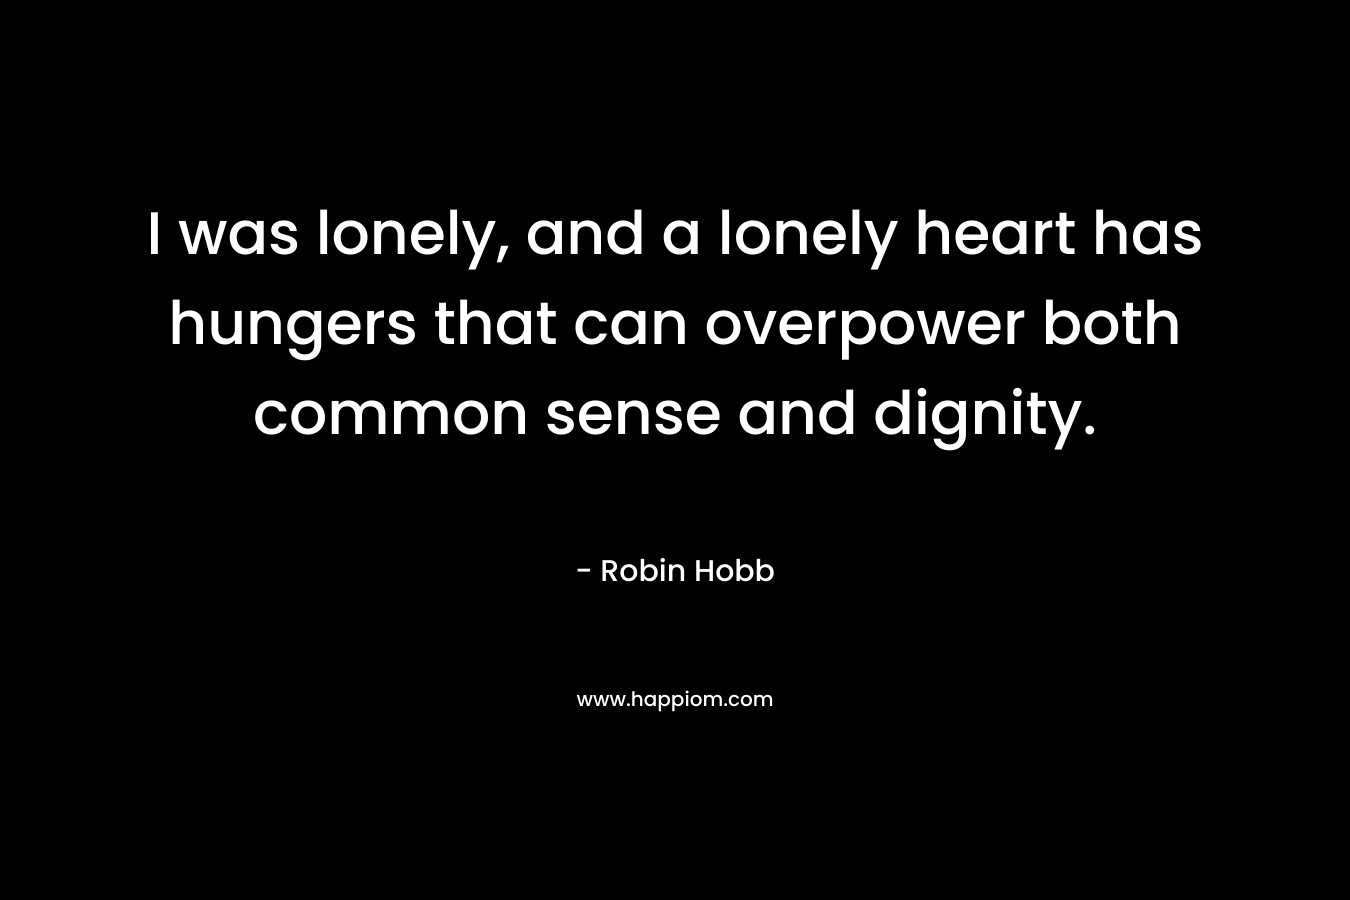 I was lonely, and a lonely heart has hungers that can overpower both common sense and dignity.